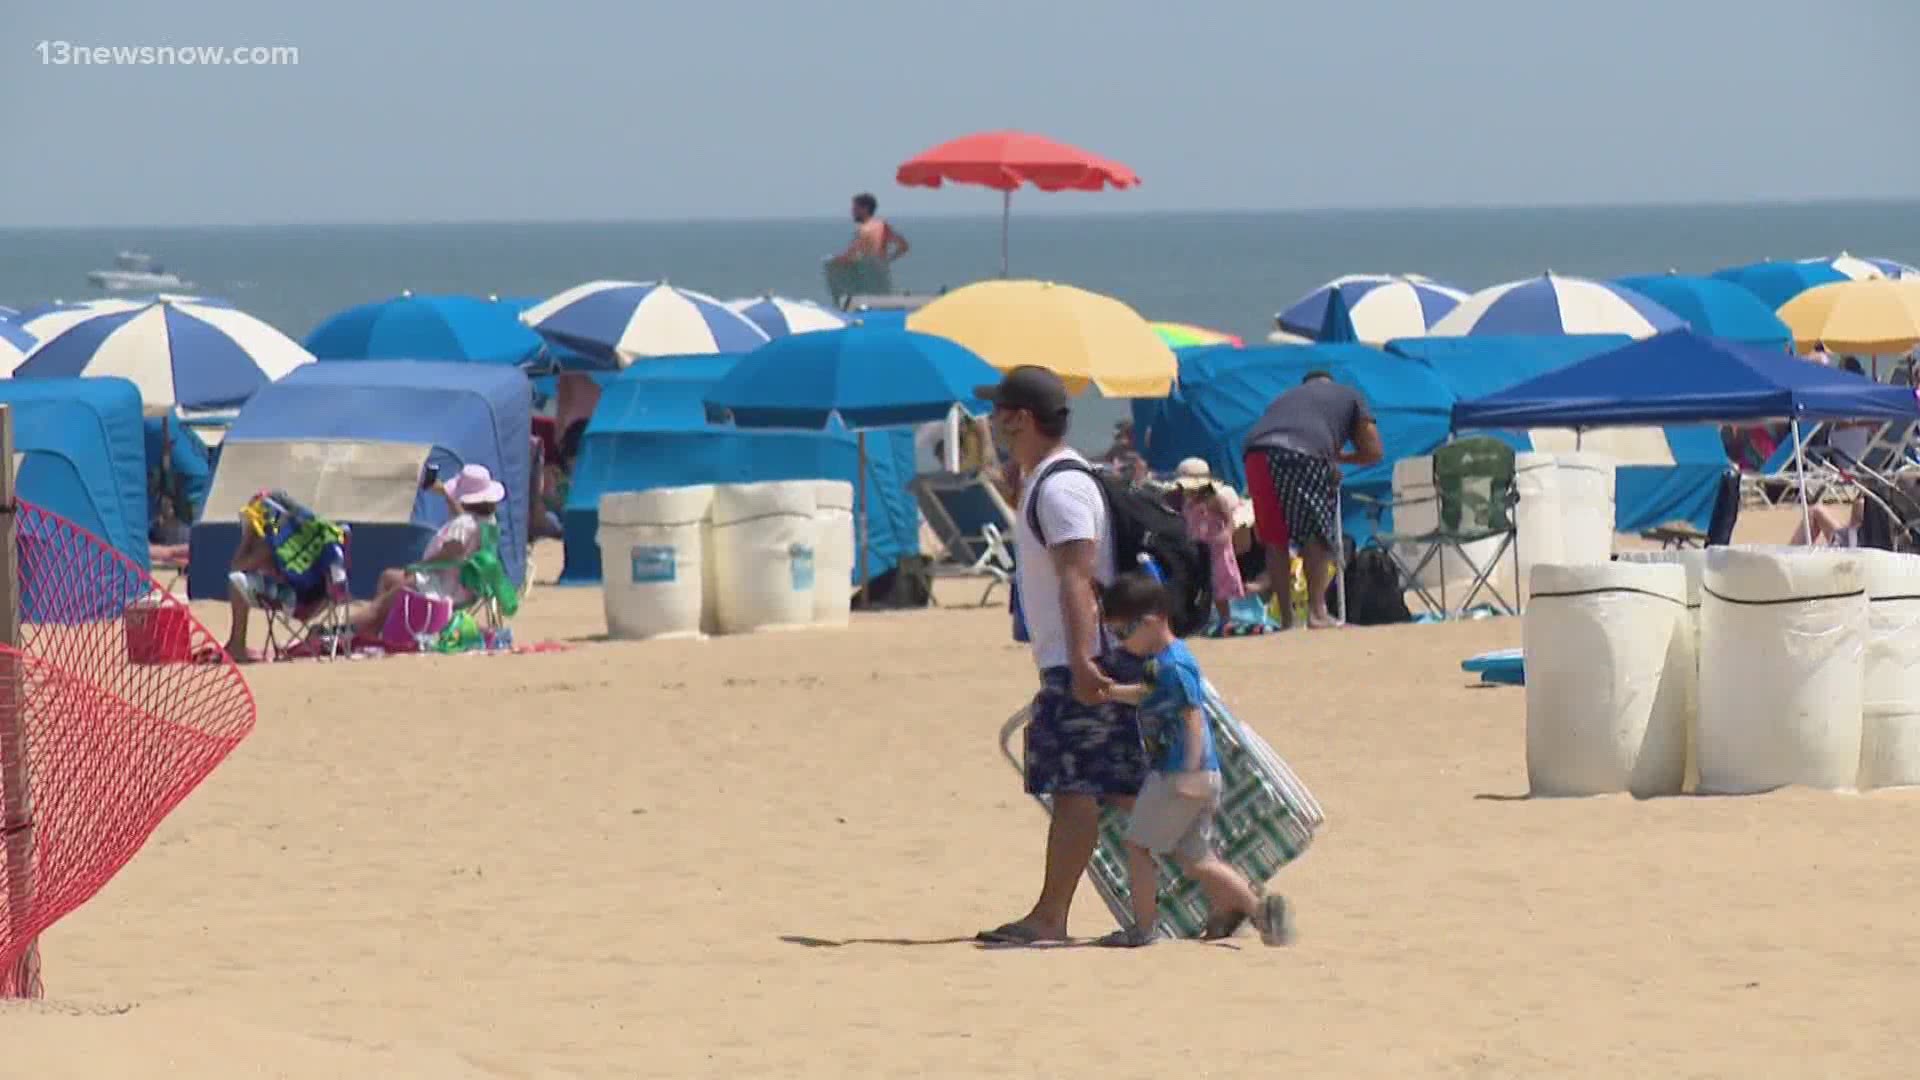 Despite pandemic, large crowds gather in Virginia Beach for Fourth of